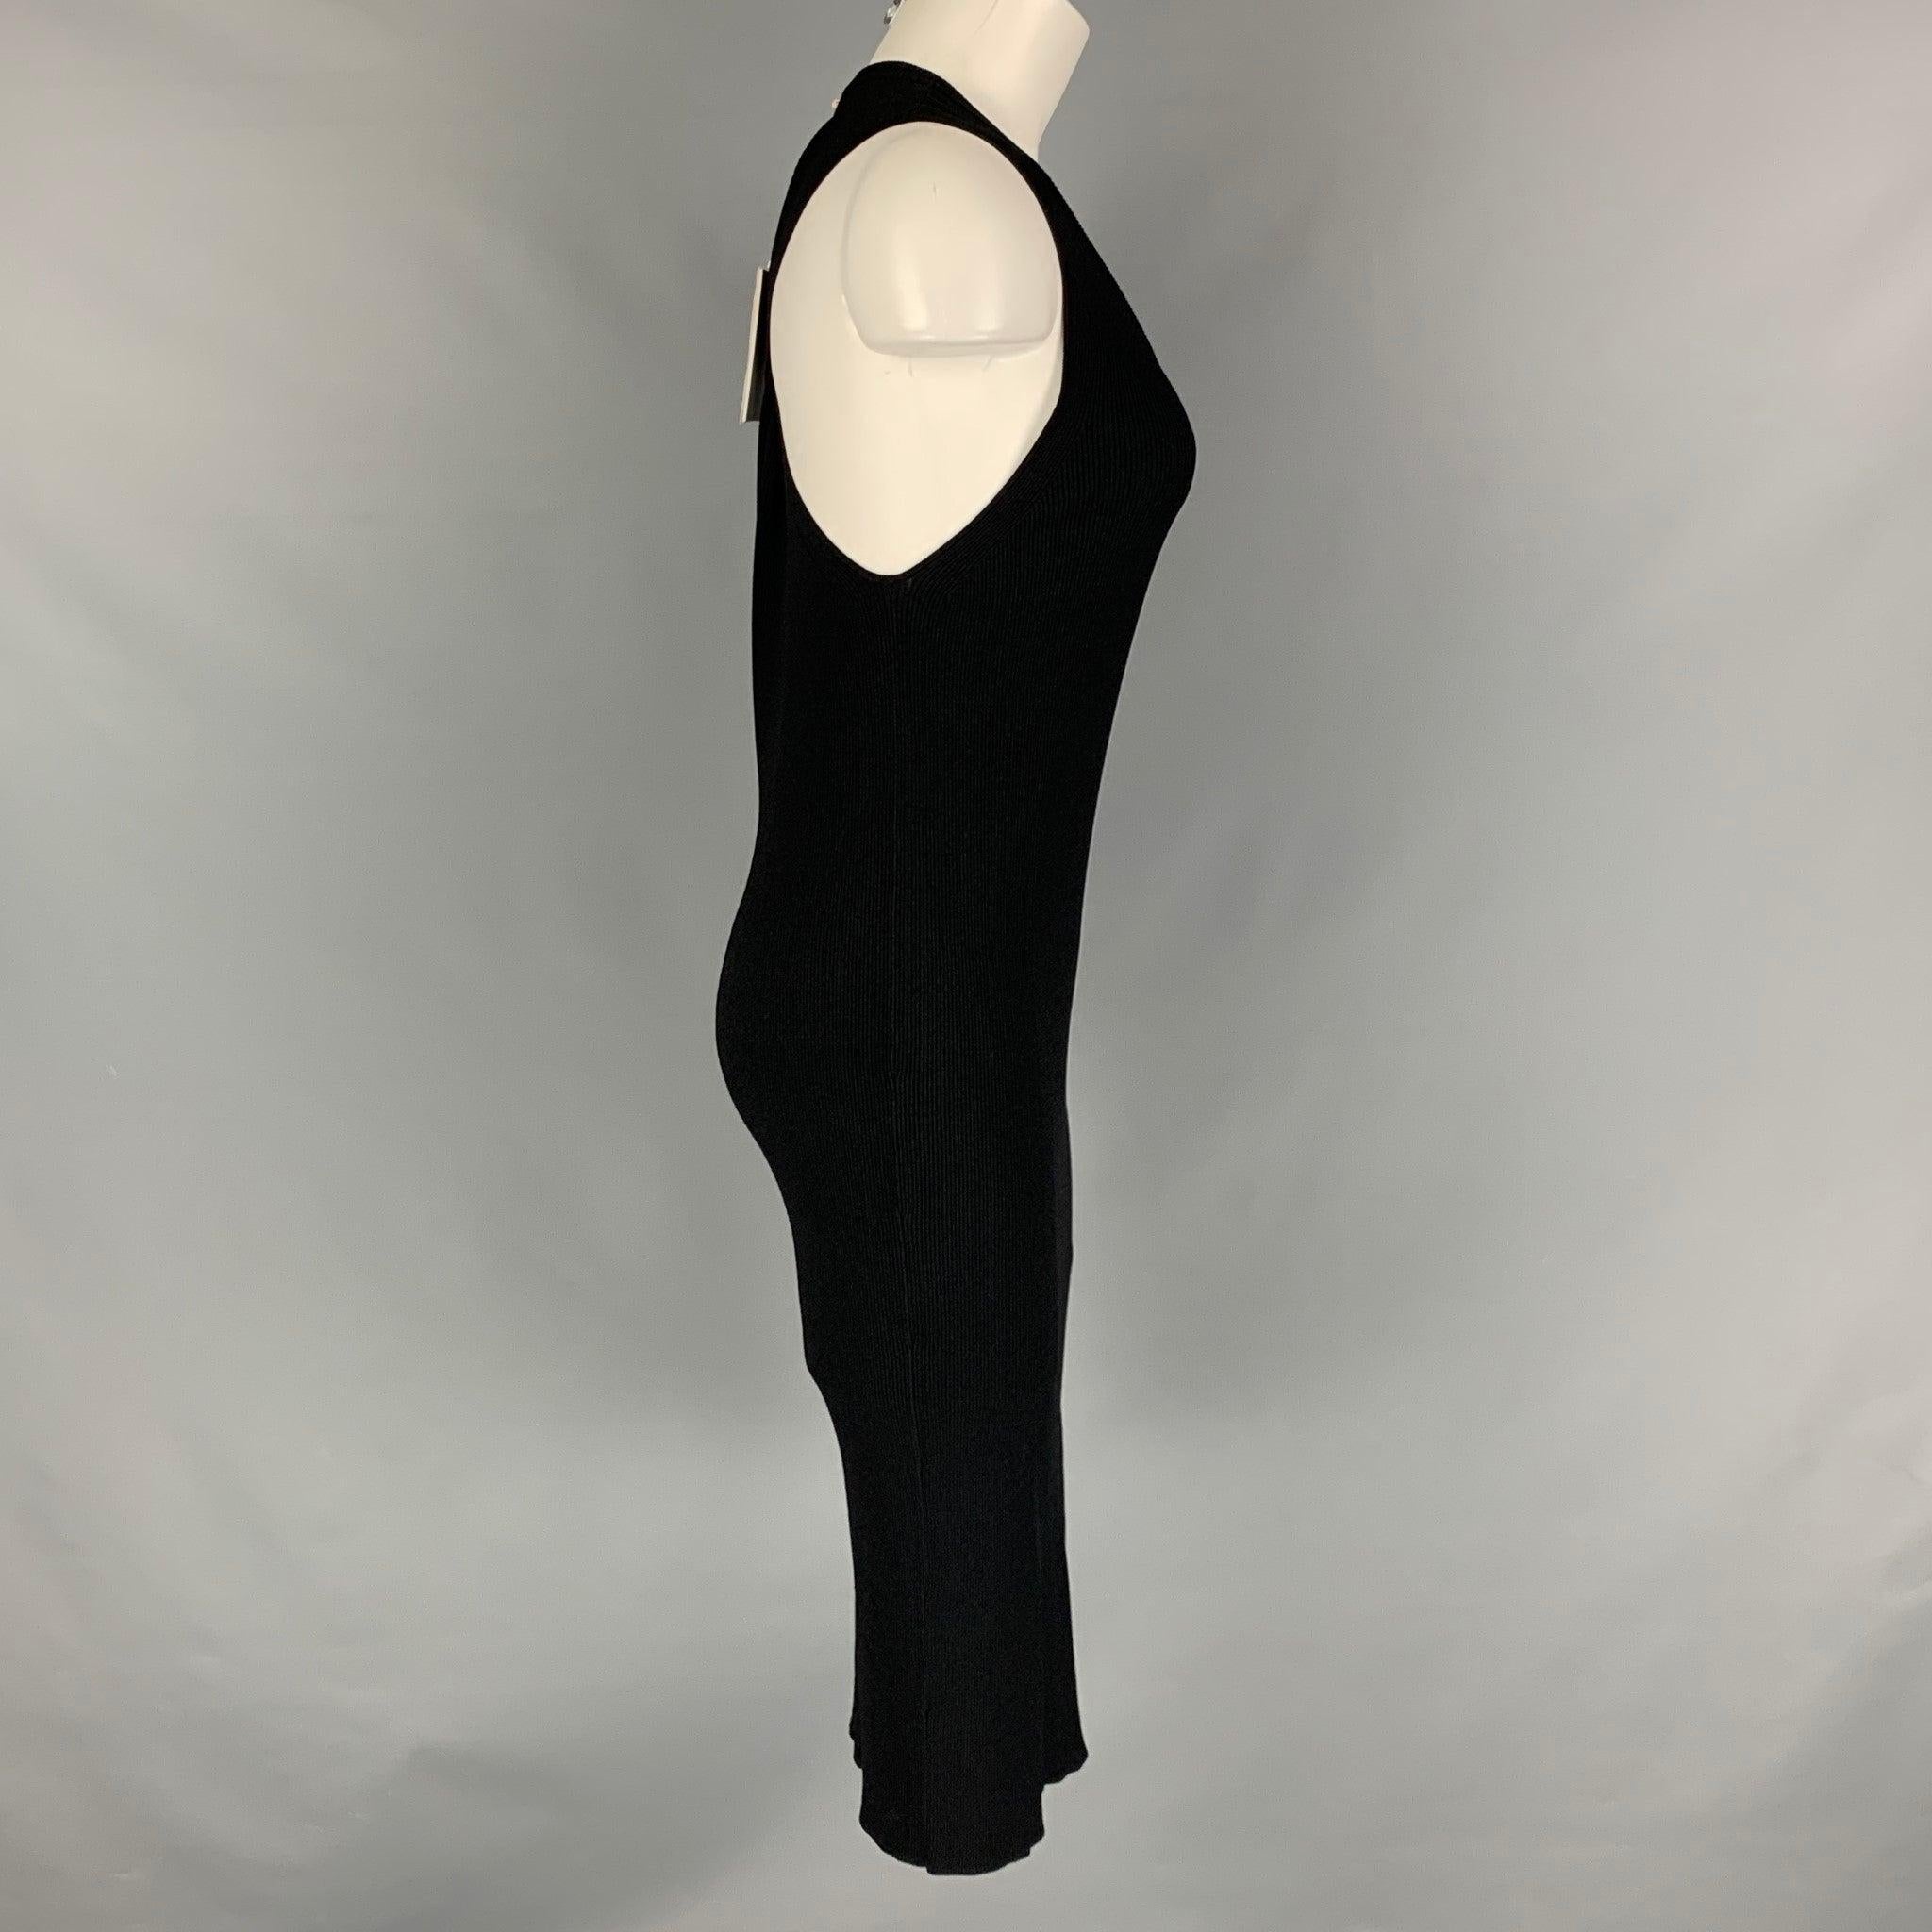 HELMUT LANG midi dress comes in black ribbed knit jersey fabric with a body con style, and twisted detail at back.New with Tags. 

Marked:   L 

Measurements: 
 
Shoulder: 11.5 inches Bust: 38 inches Waist: 34 inches Hip: 38 inches Length: 45 inches